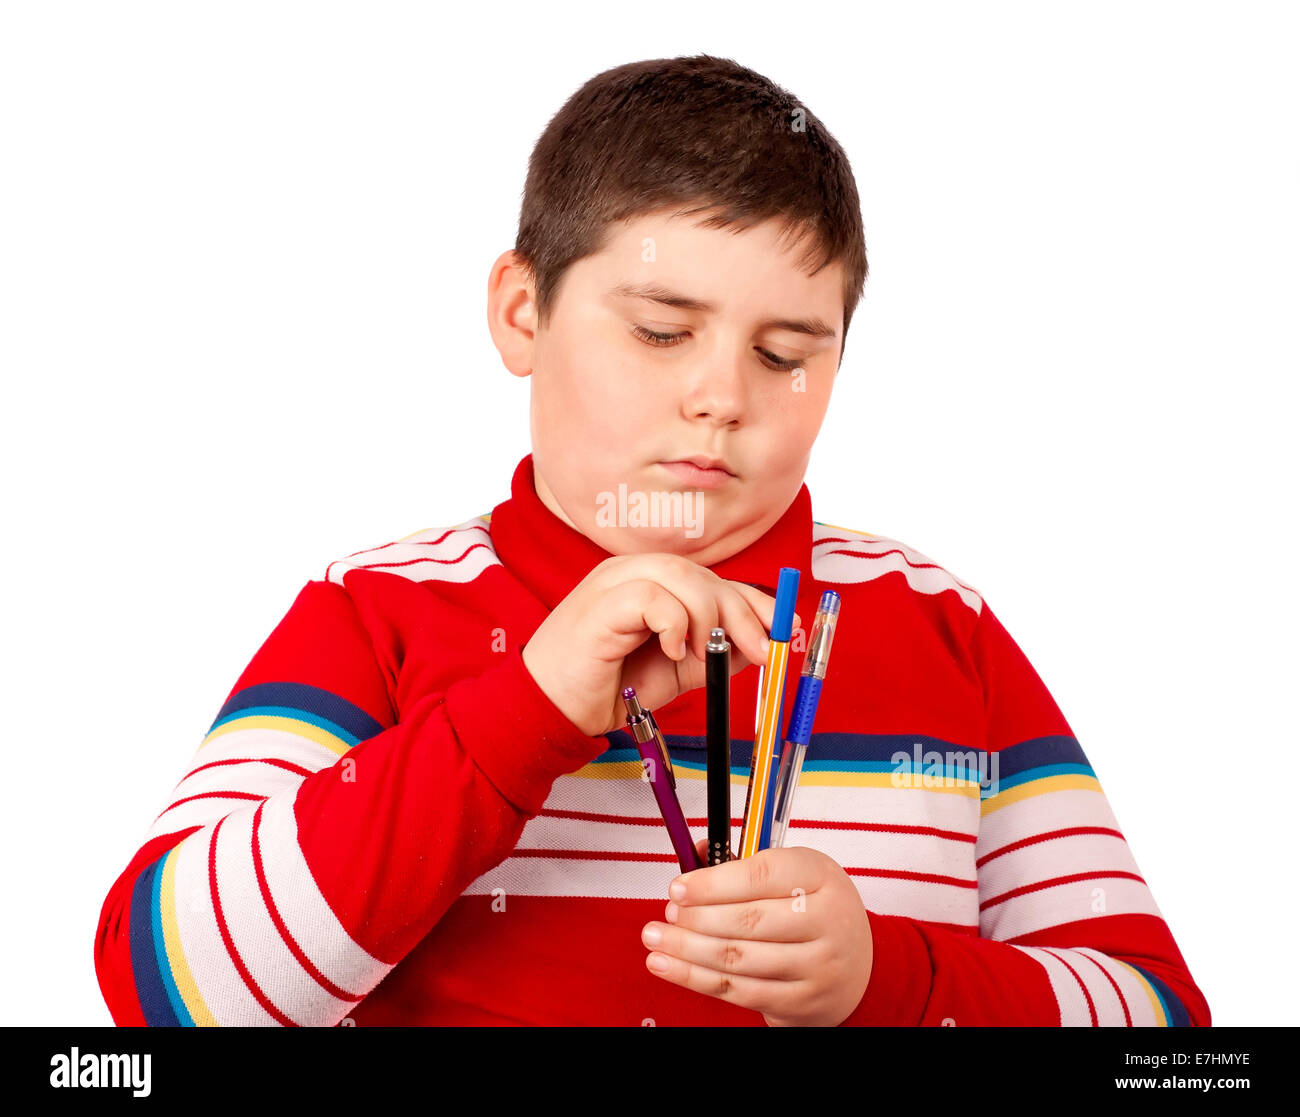 Child who does not know what pen to choose, isolated over white background Stock Photo